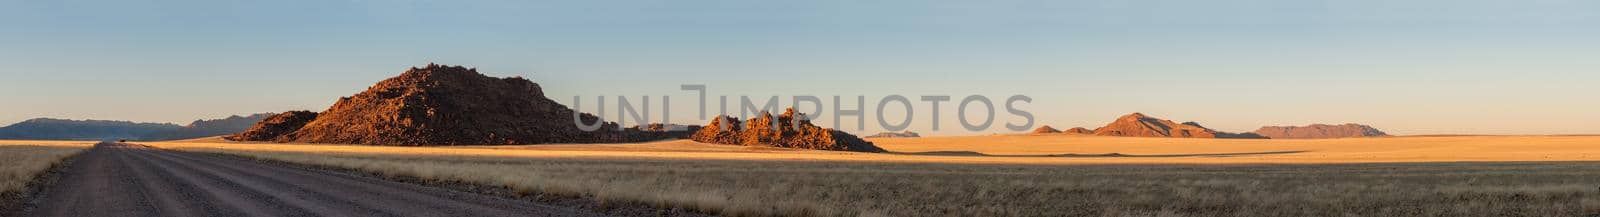 Panoramic view of the landscape in the Namibrand area of Namibia